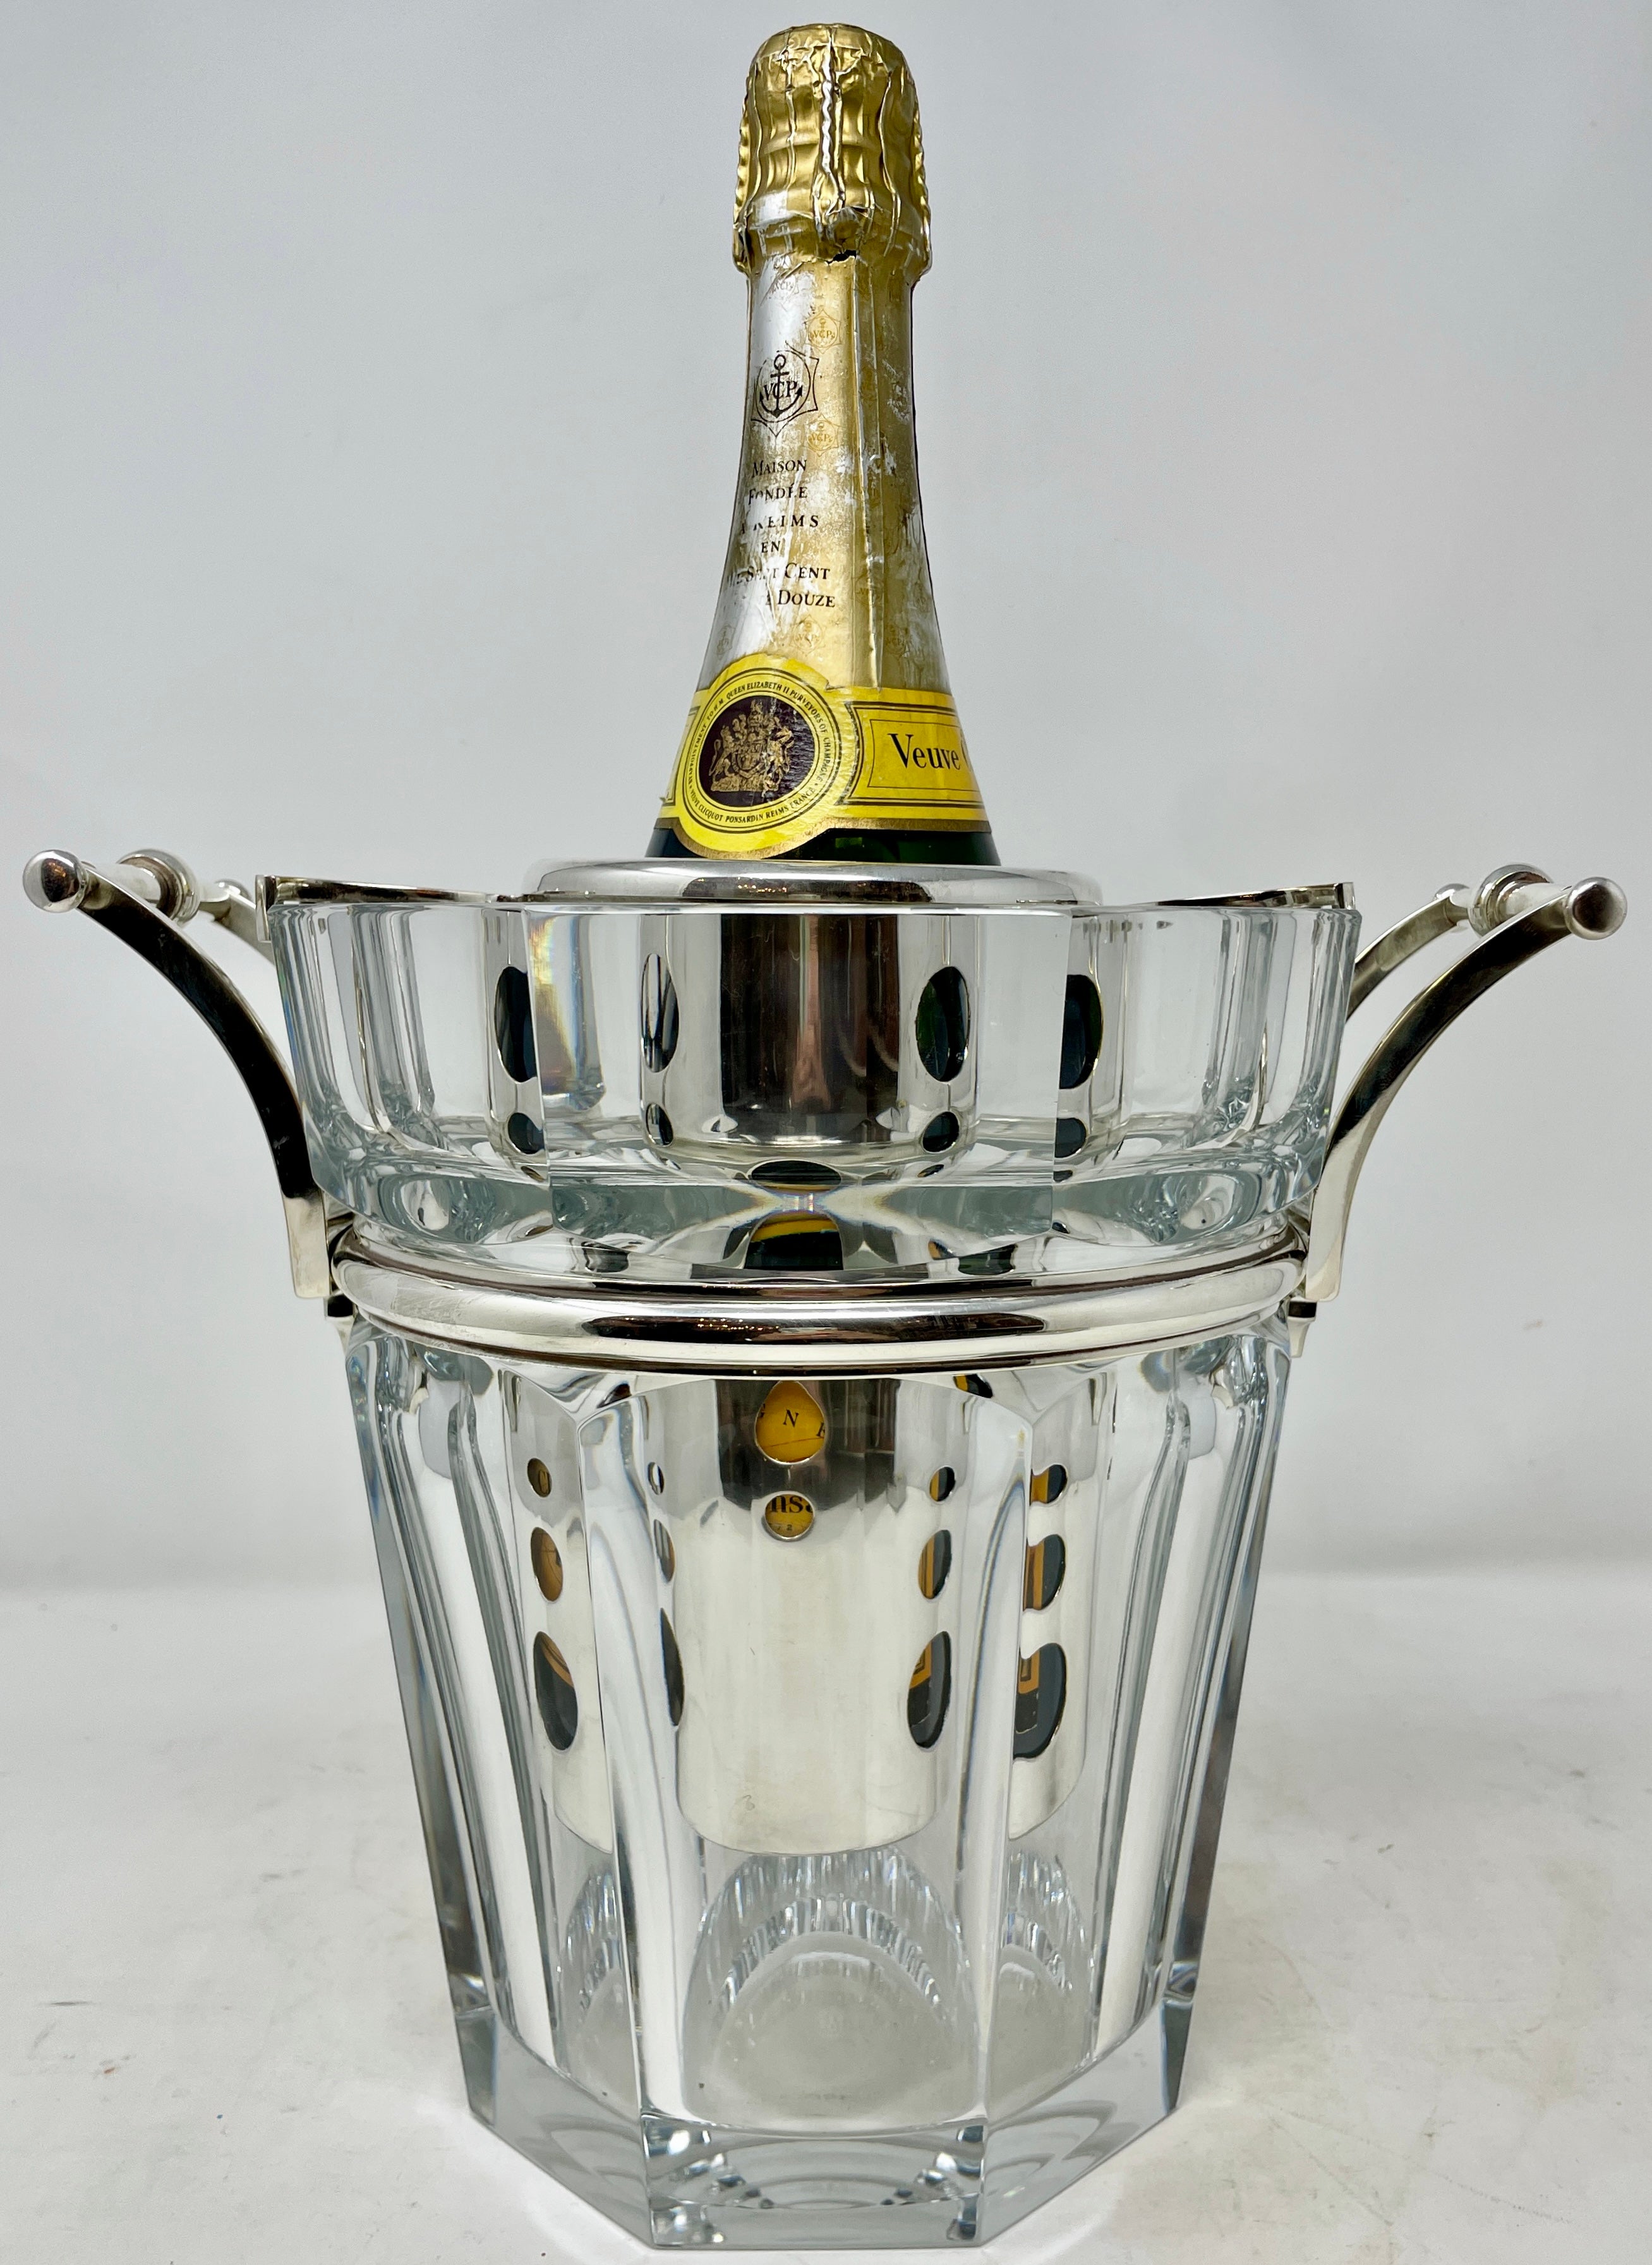 Unusual Estate French Art Deco Baccarat Signed crystal & silver-plated champagne or wine bucket with inset bottle holder (or 'frog'), Circa 1940's.